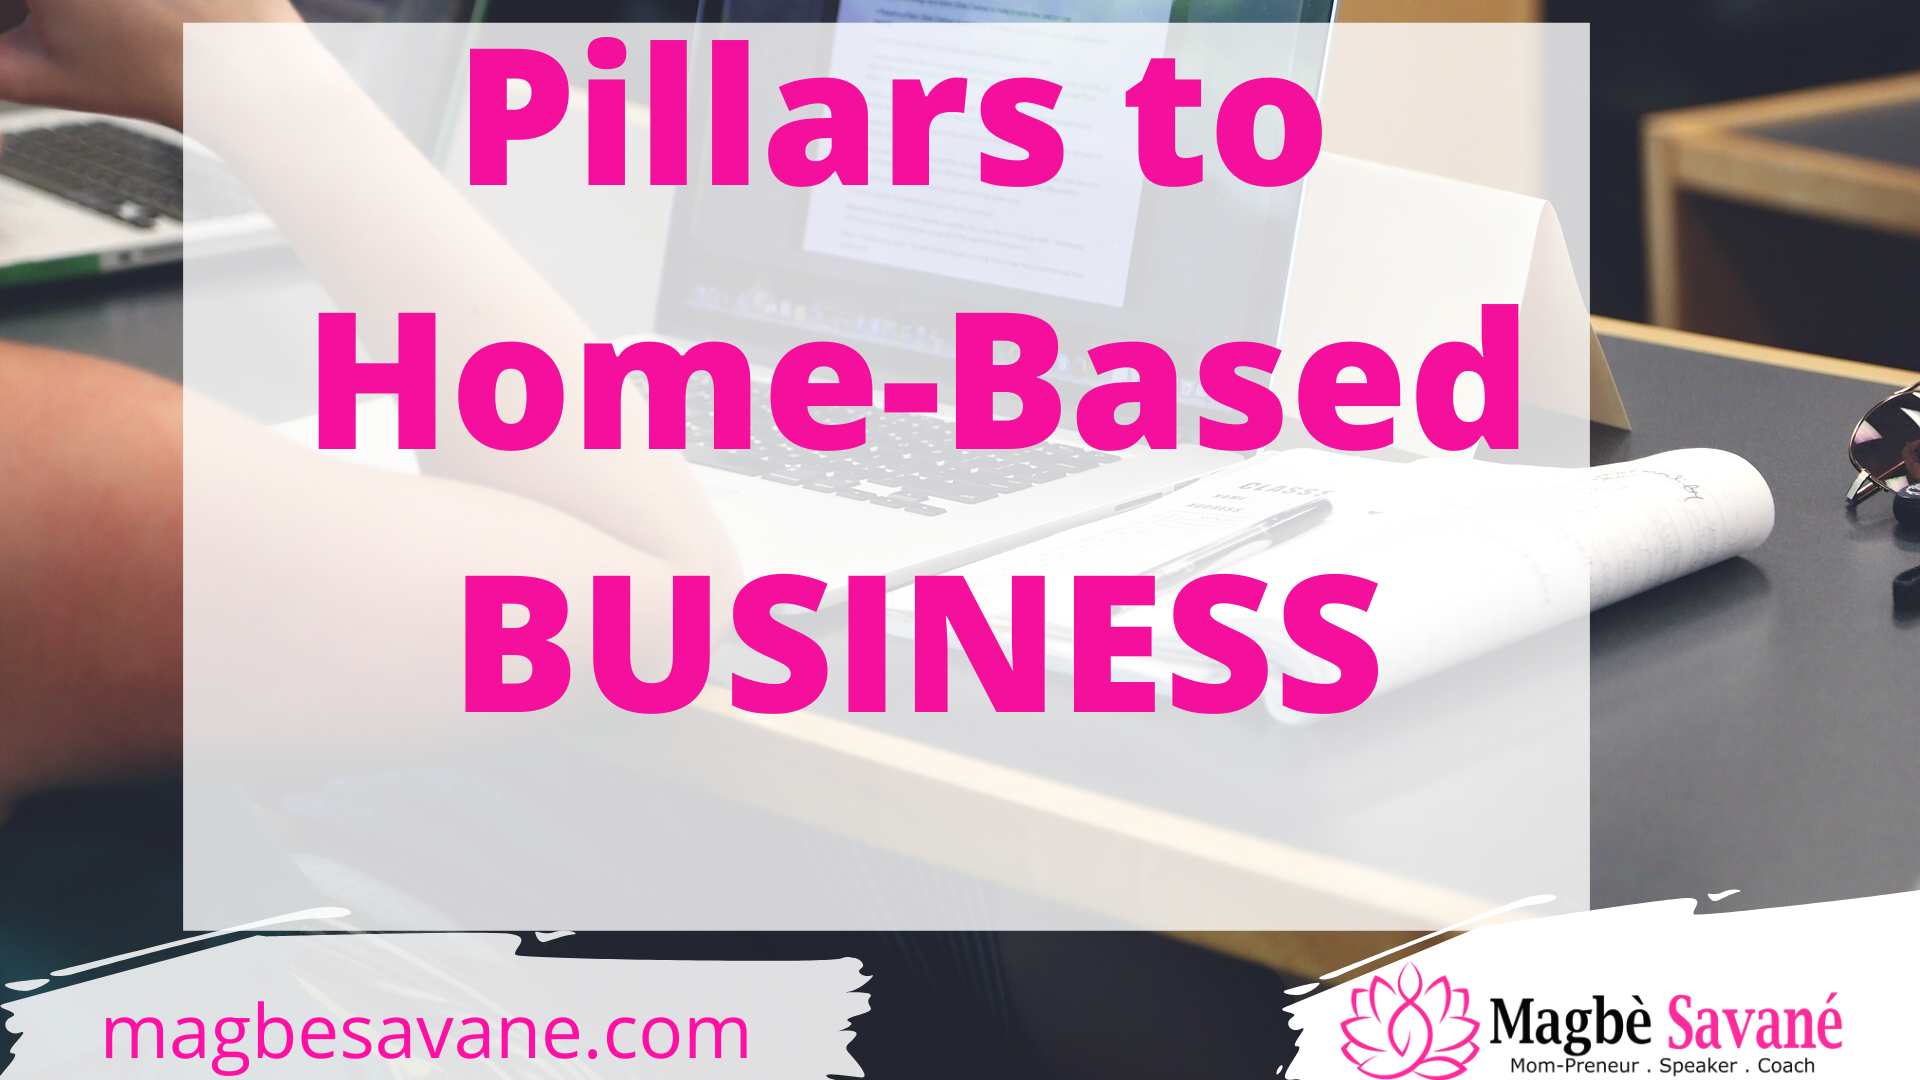 3 Pillars of a Solid Home-Based Business